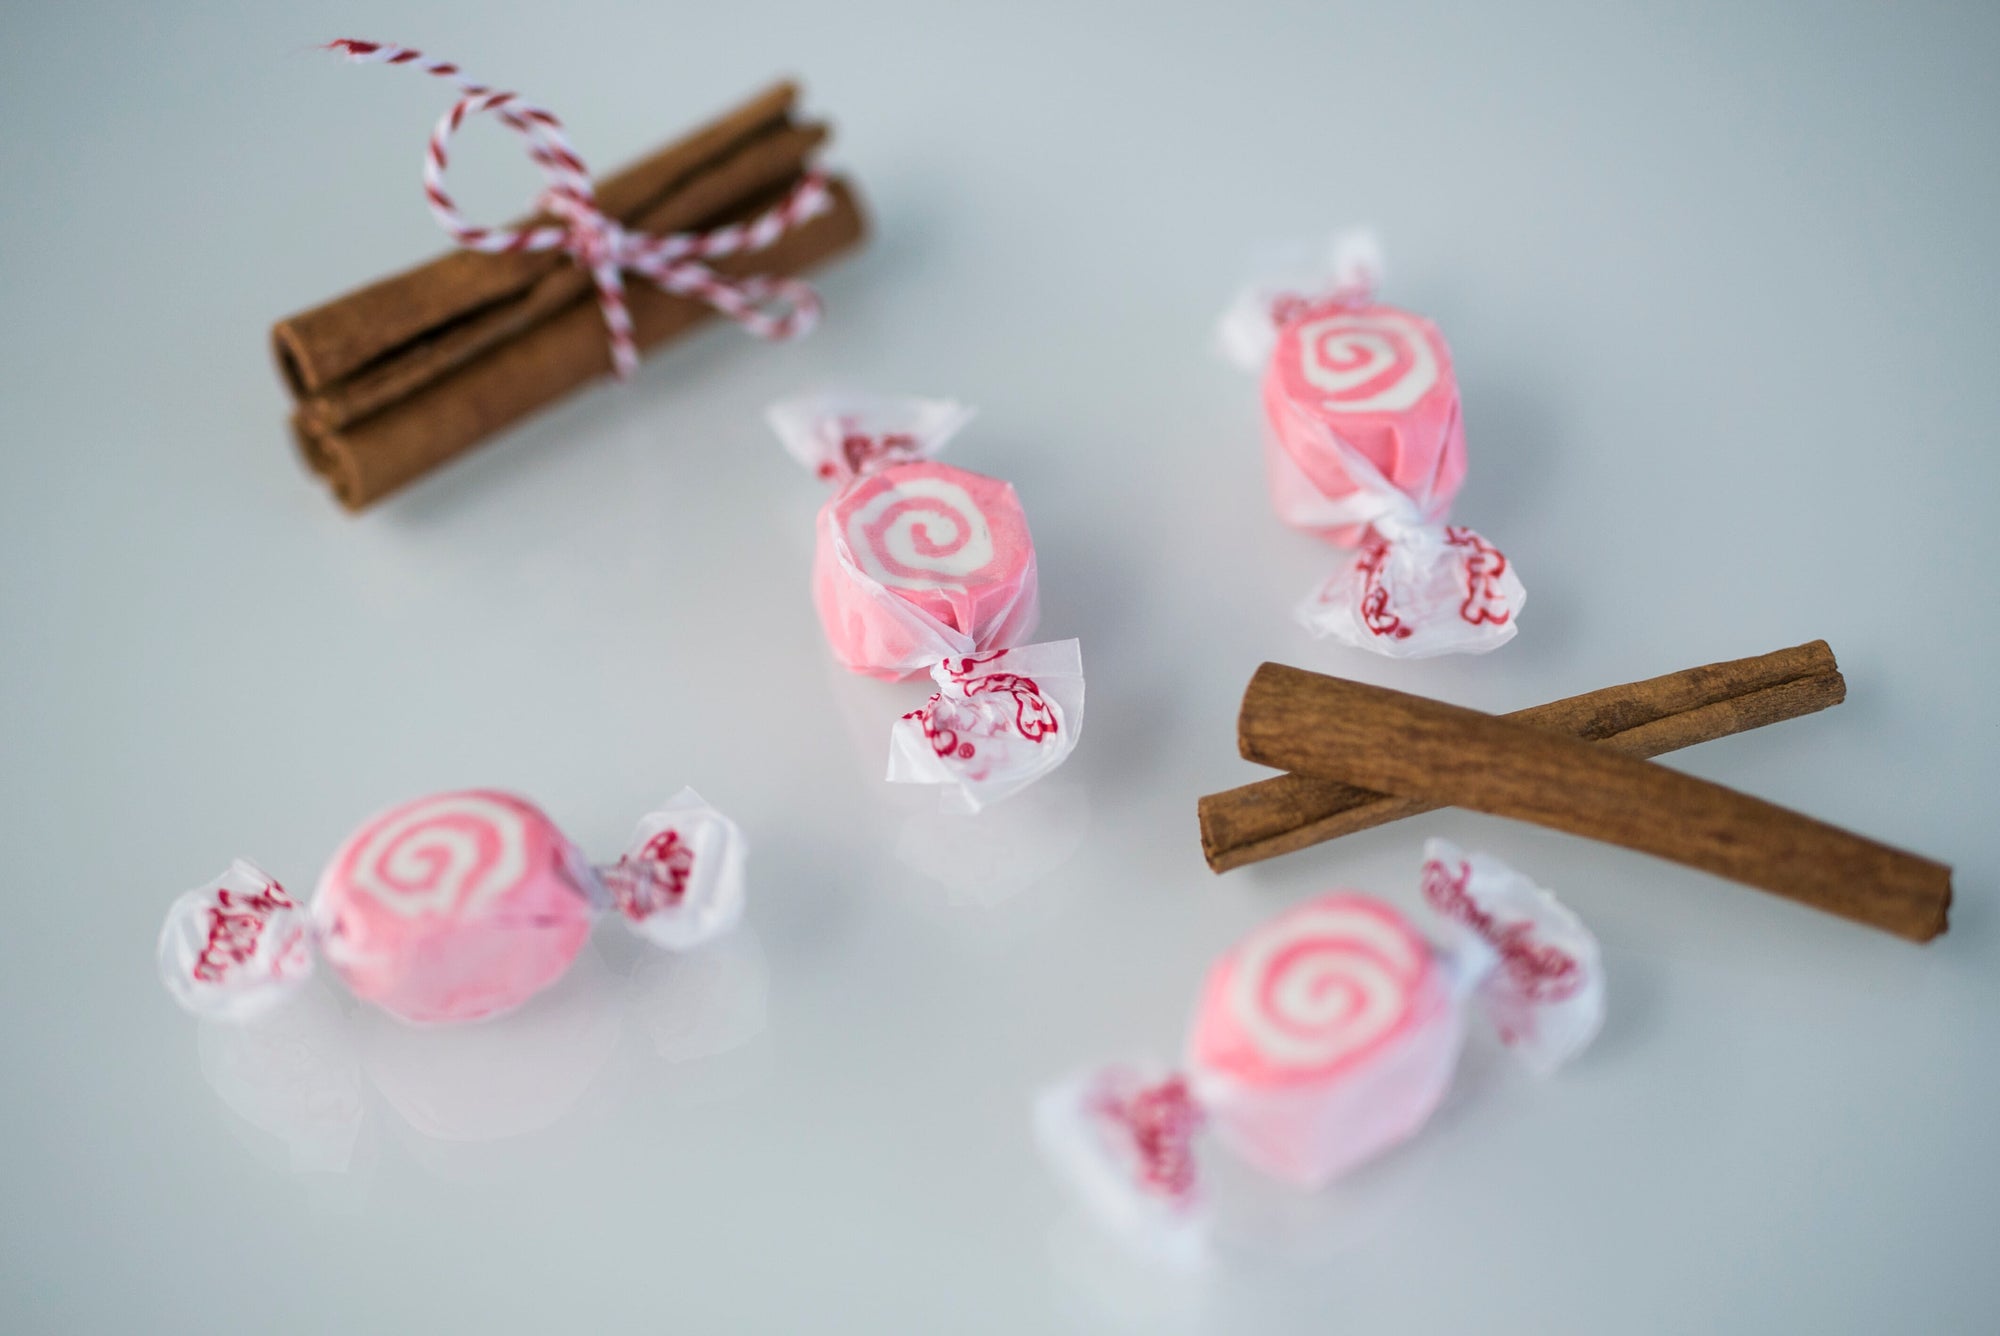 Cinnamon Taffy - February's Flavor of the Month